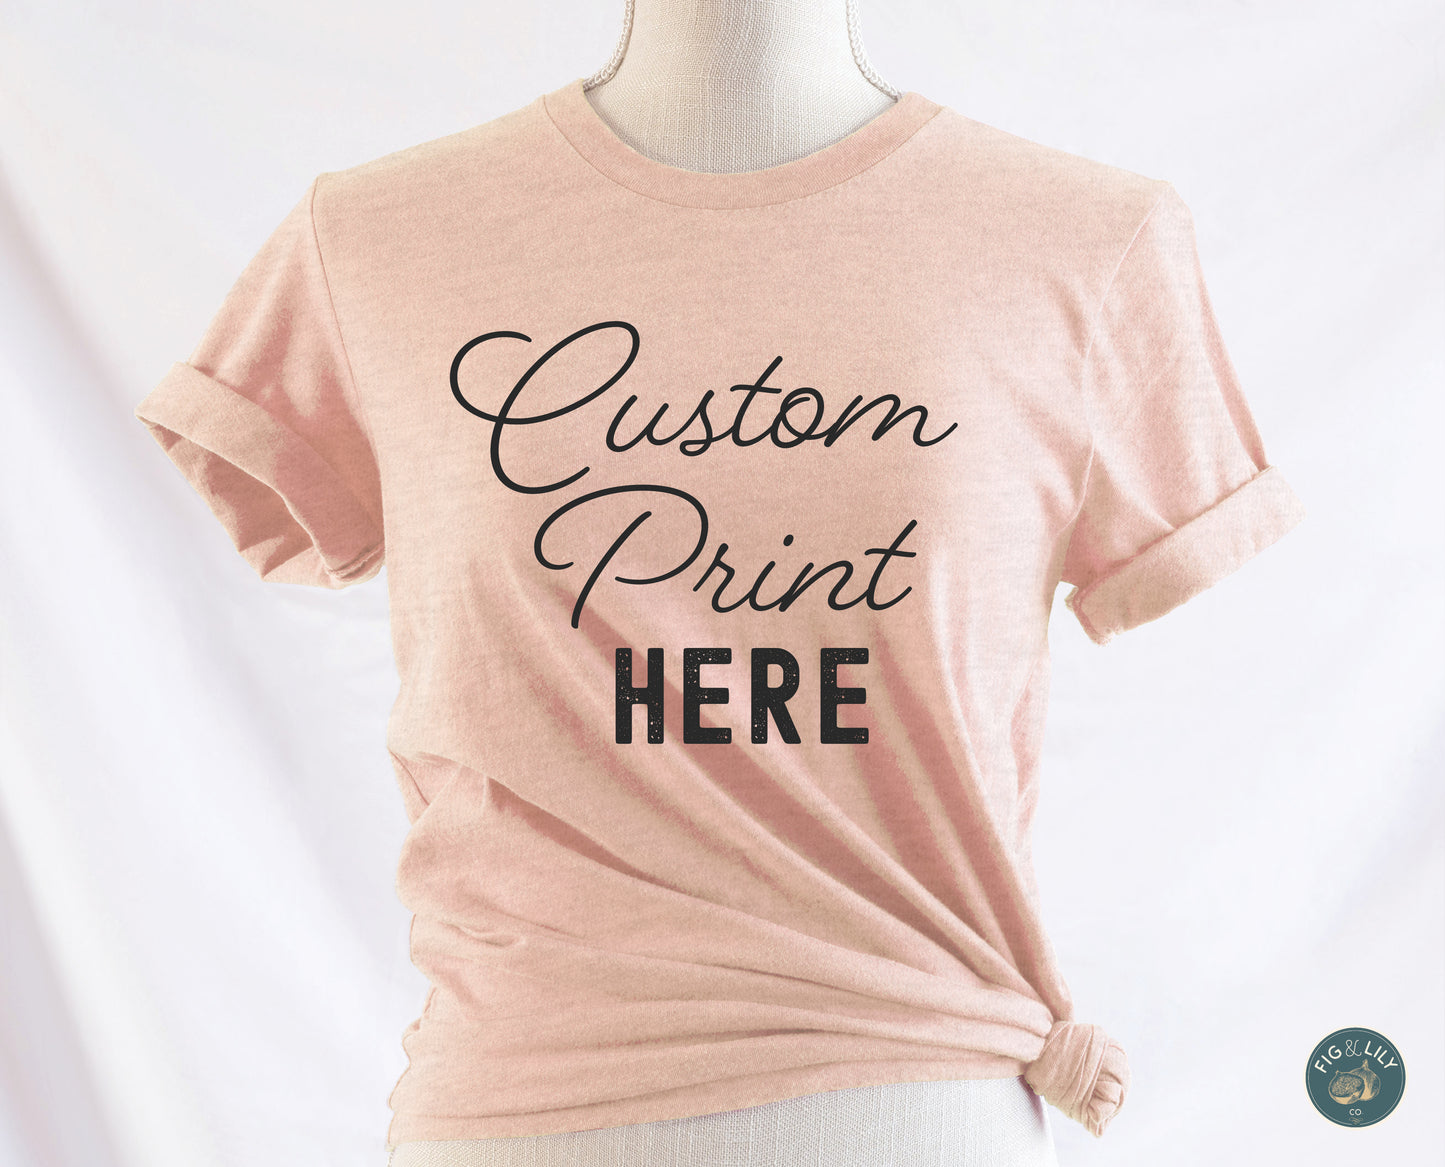 Personalized custom design t-shirt with your approved design printed on soft heather prism peach unisex tshirt 